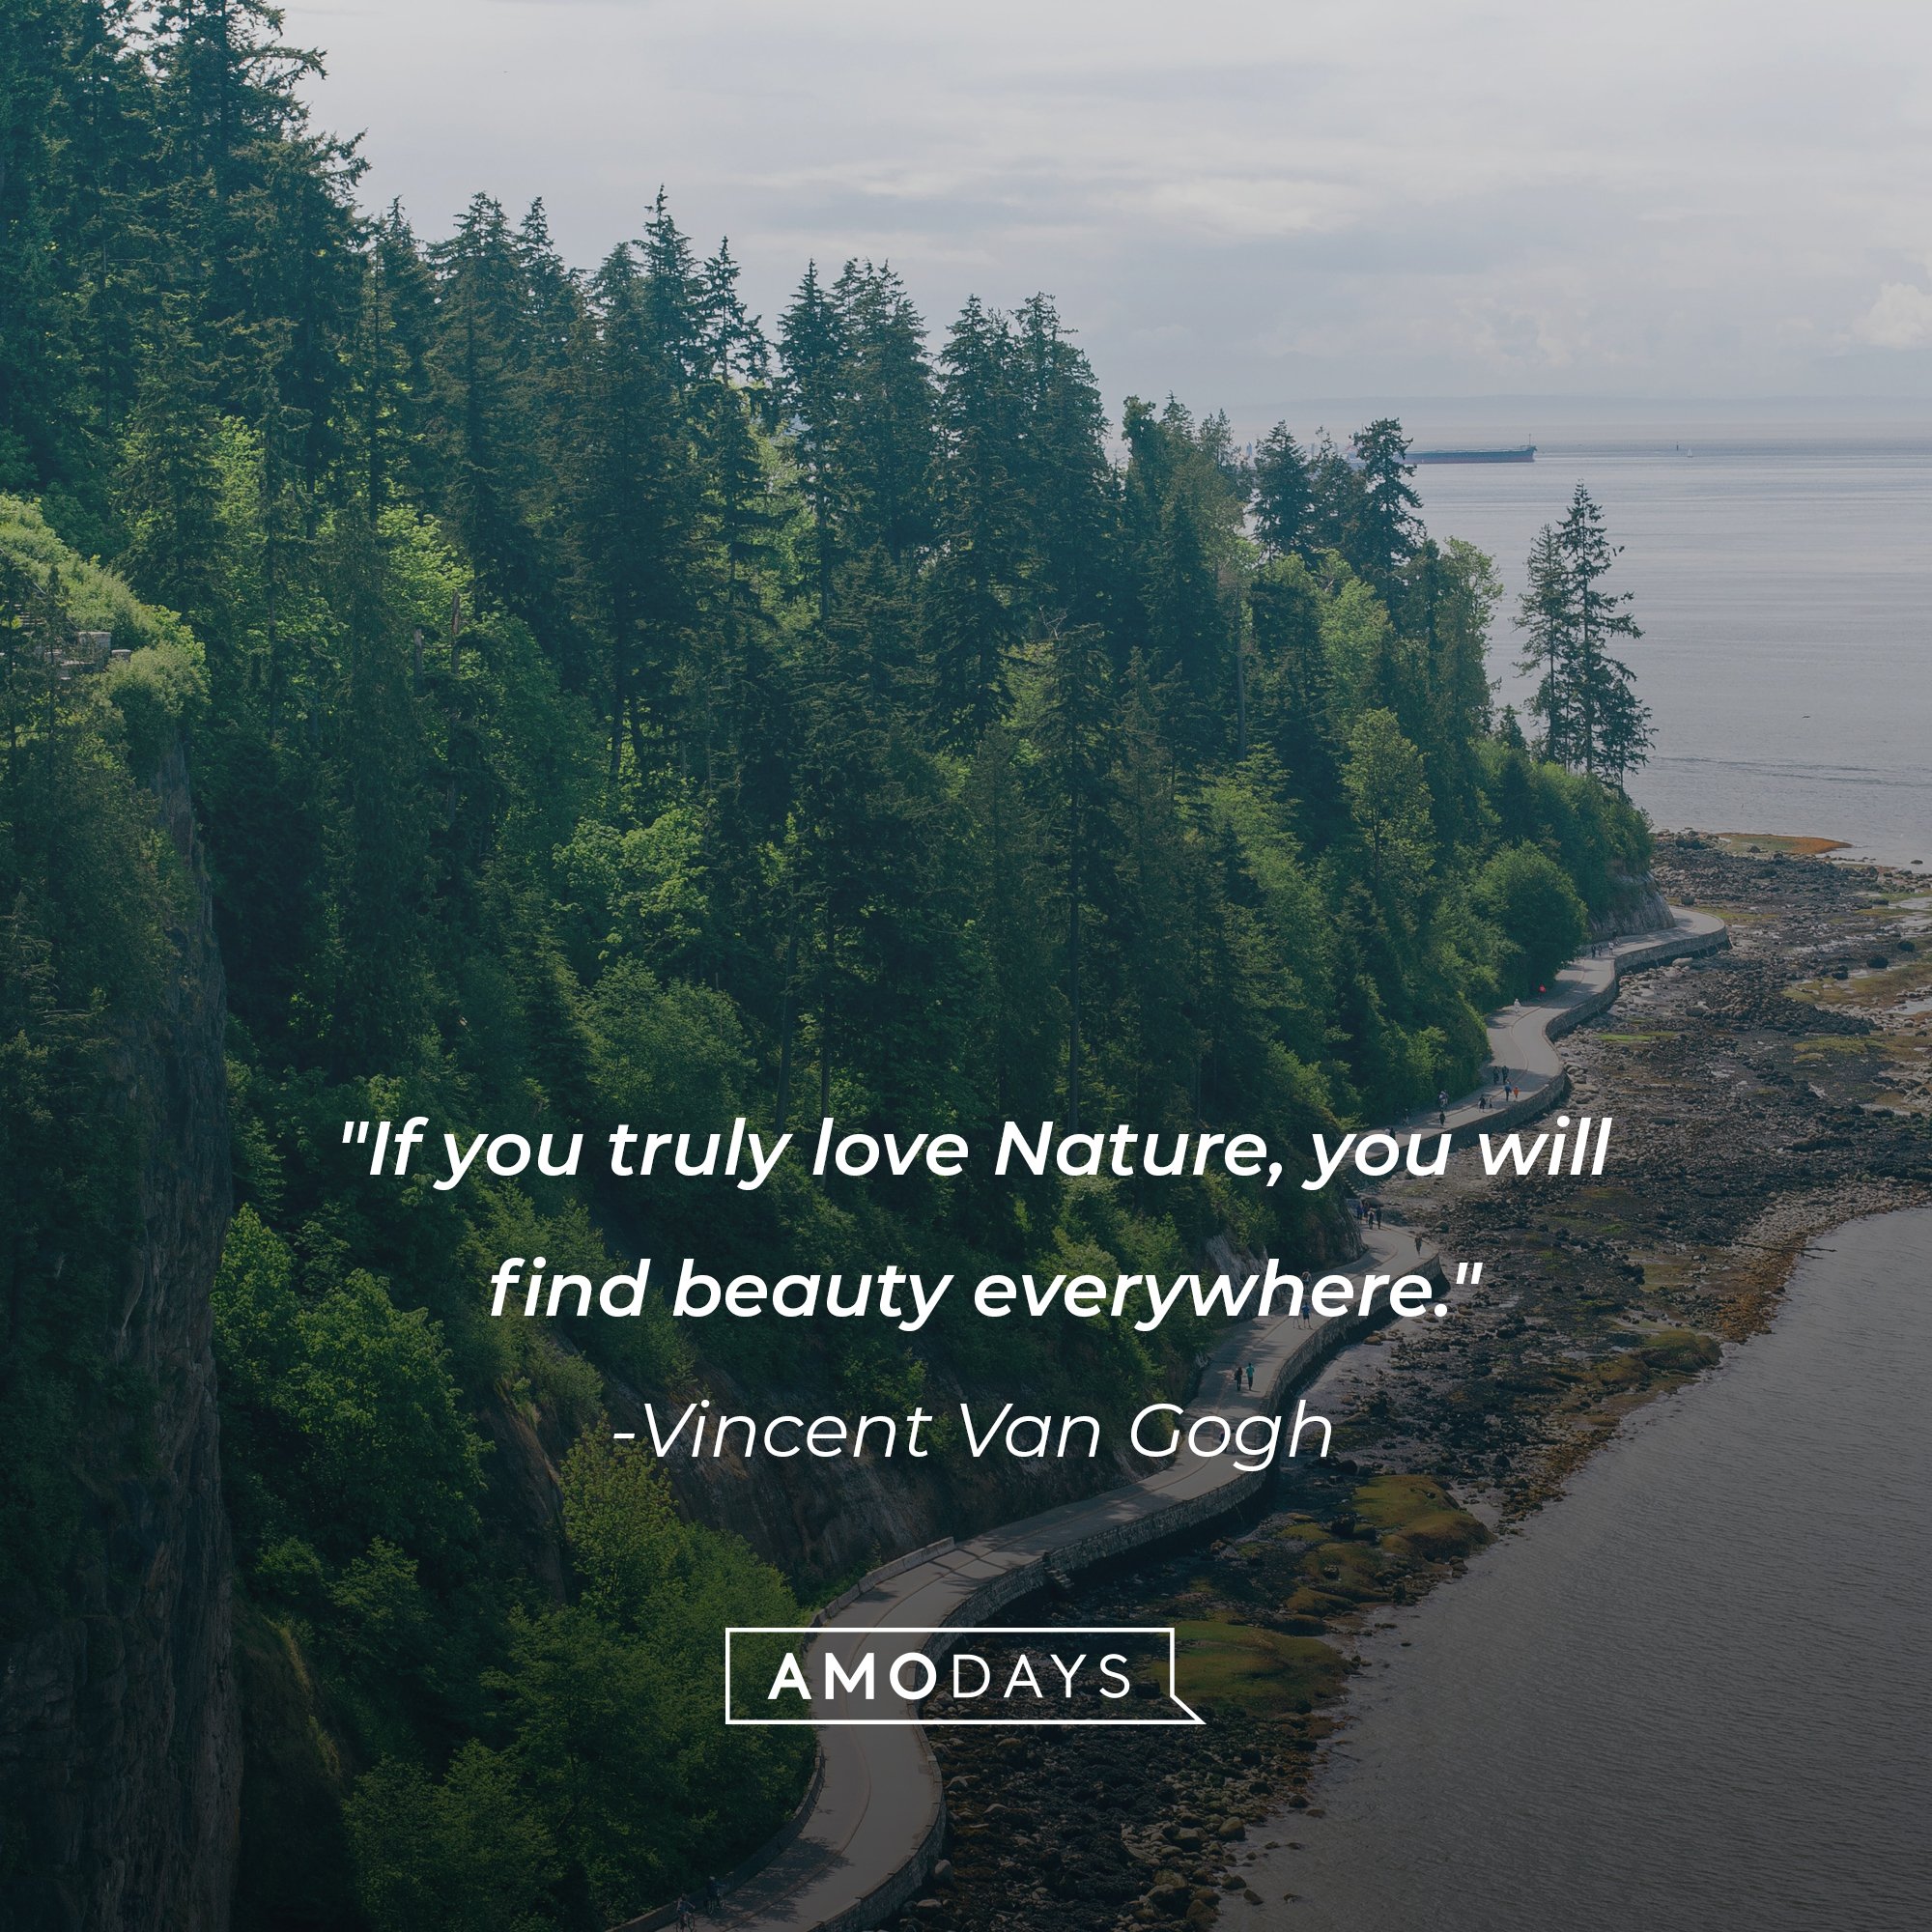 Vincent Van Gogh's quote: "If you truly love Nature, you will find beauty everywhere." | Image: AmoDays